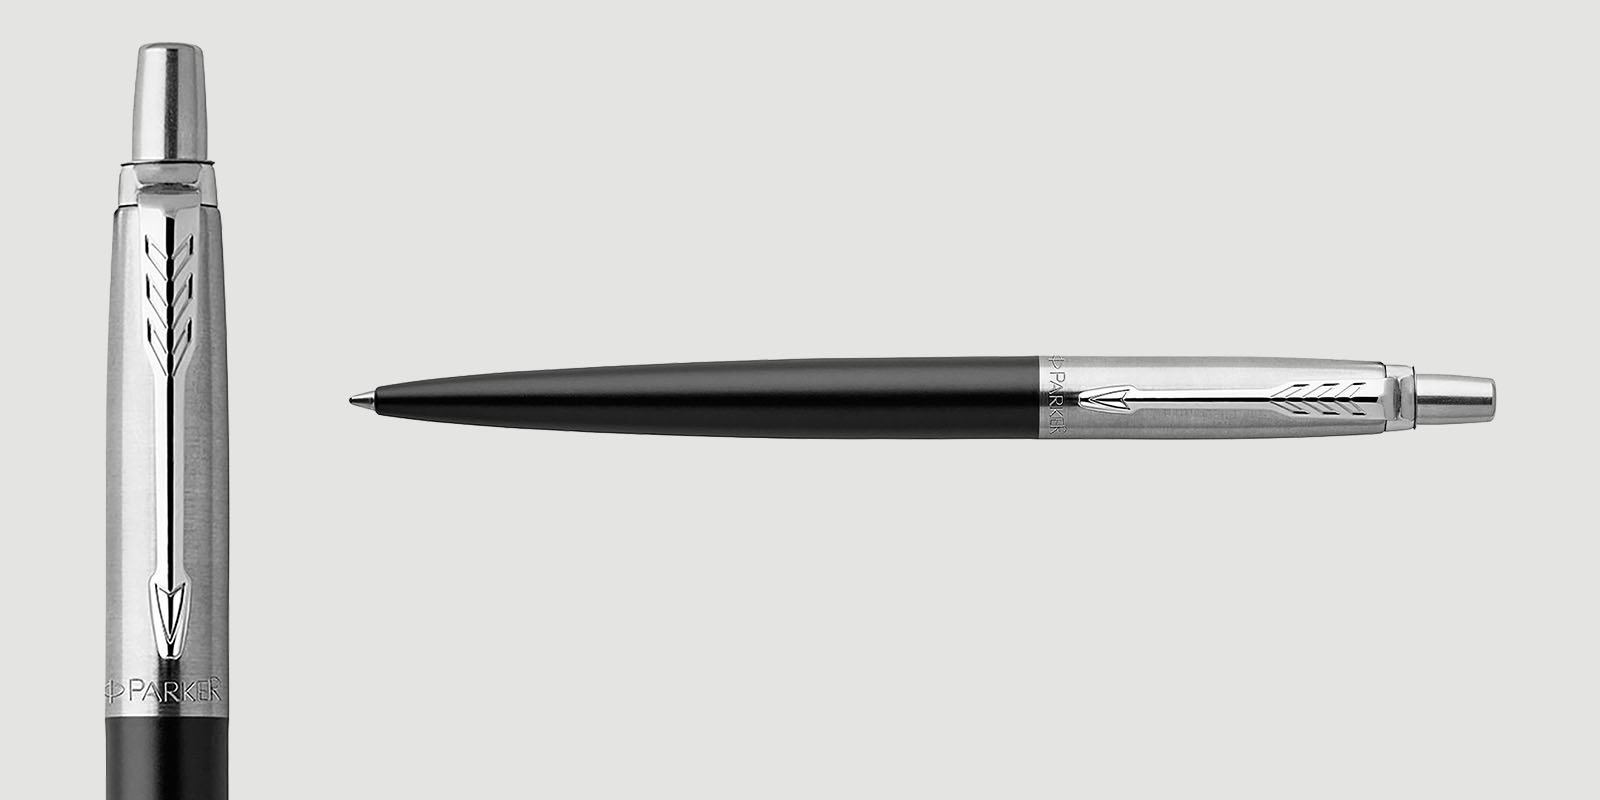 A full view and closeup of a Jotter ballpoint pen in Richmond matte black C T finish.